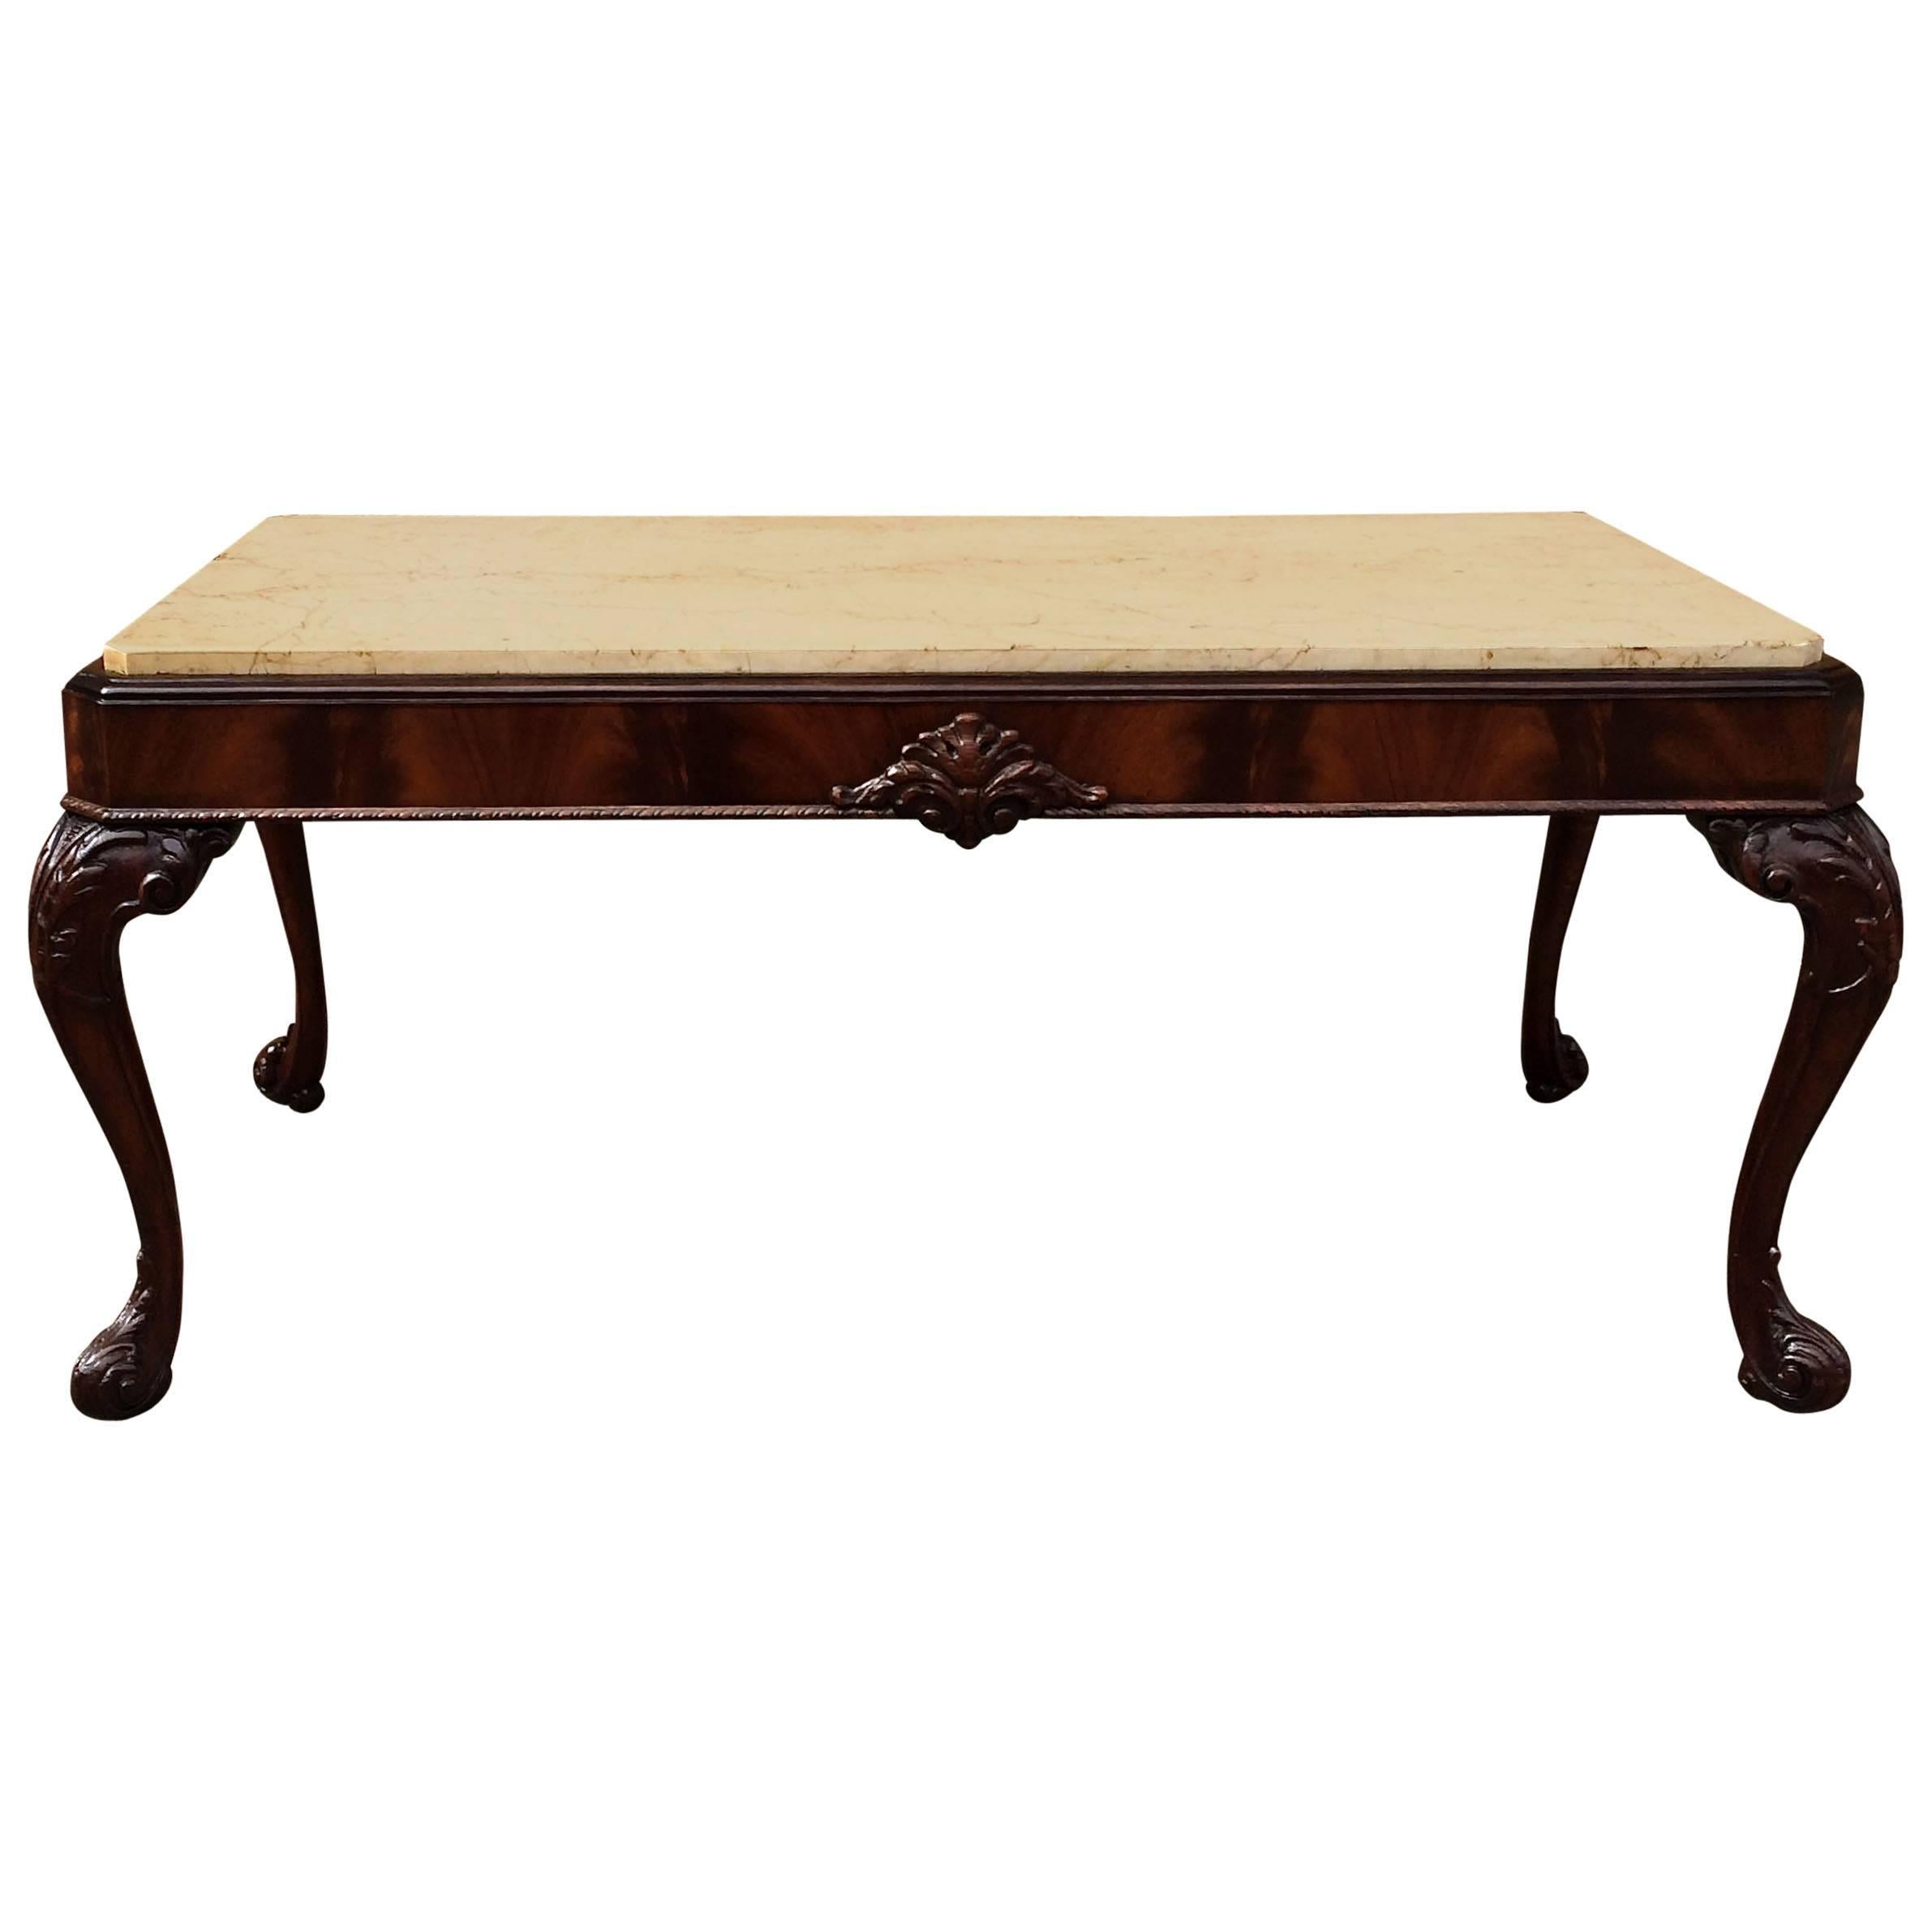 Antique Carved Flame Mahogany And Marble Coffee Table